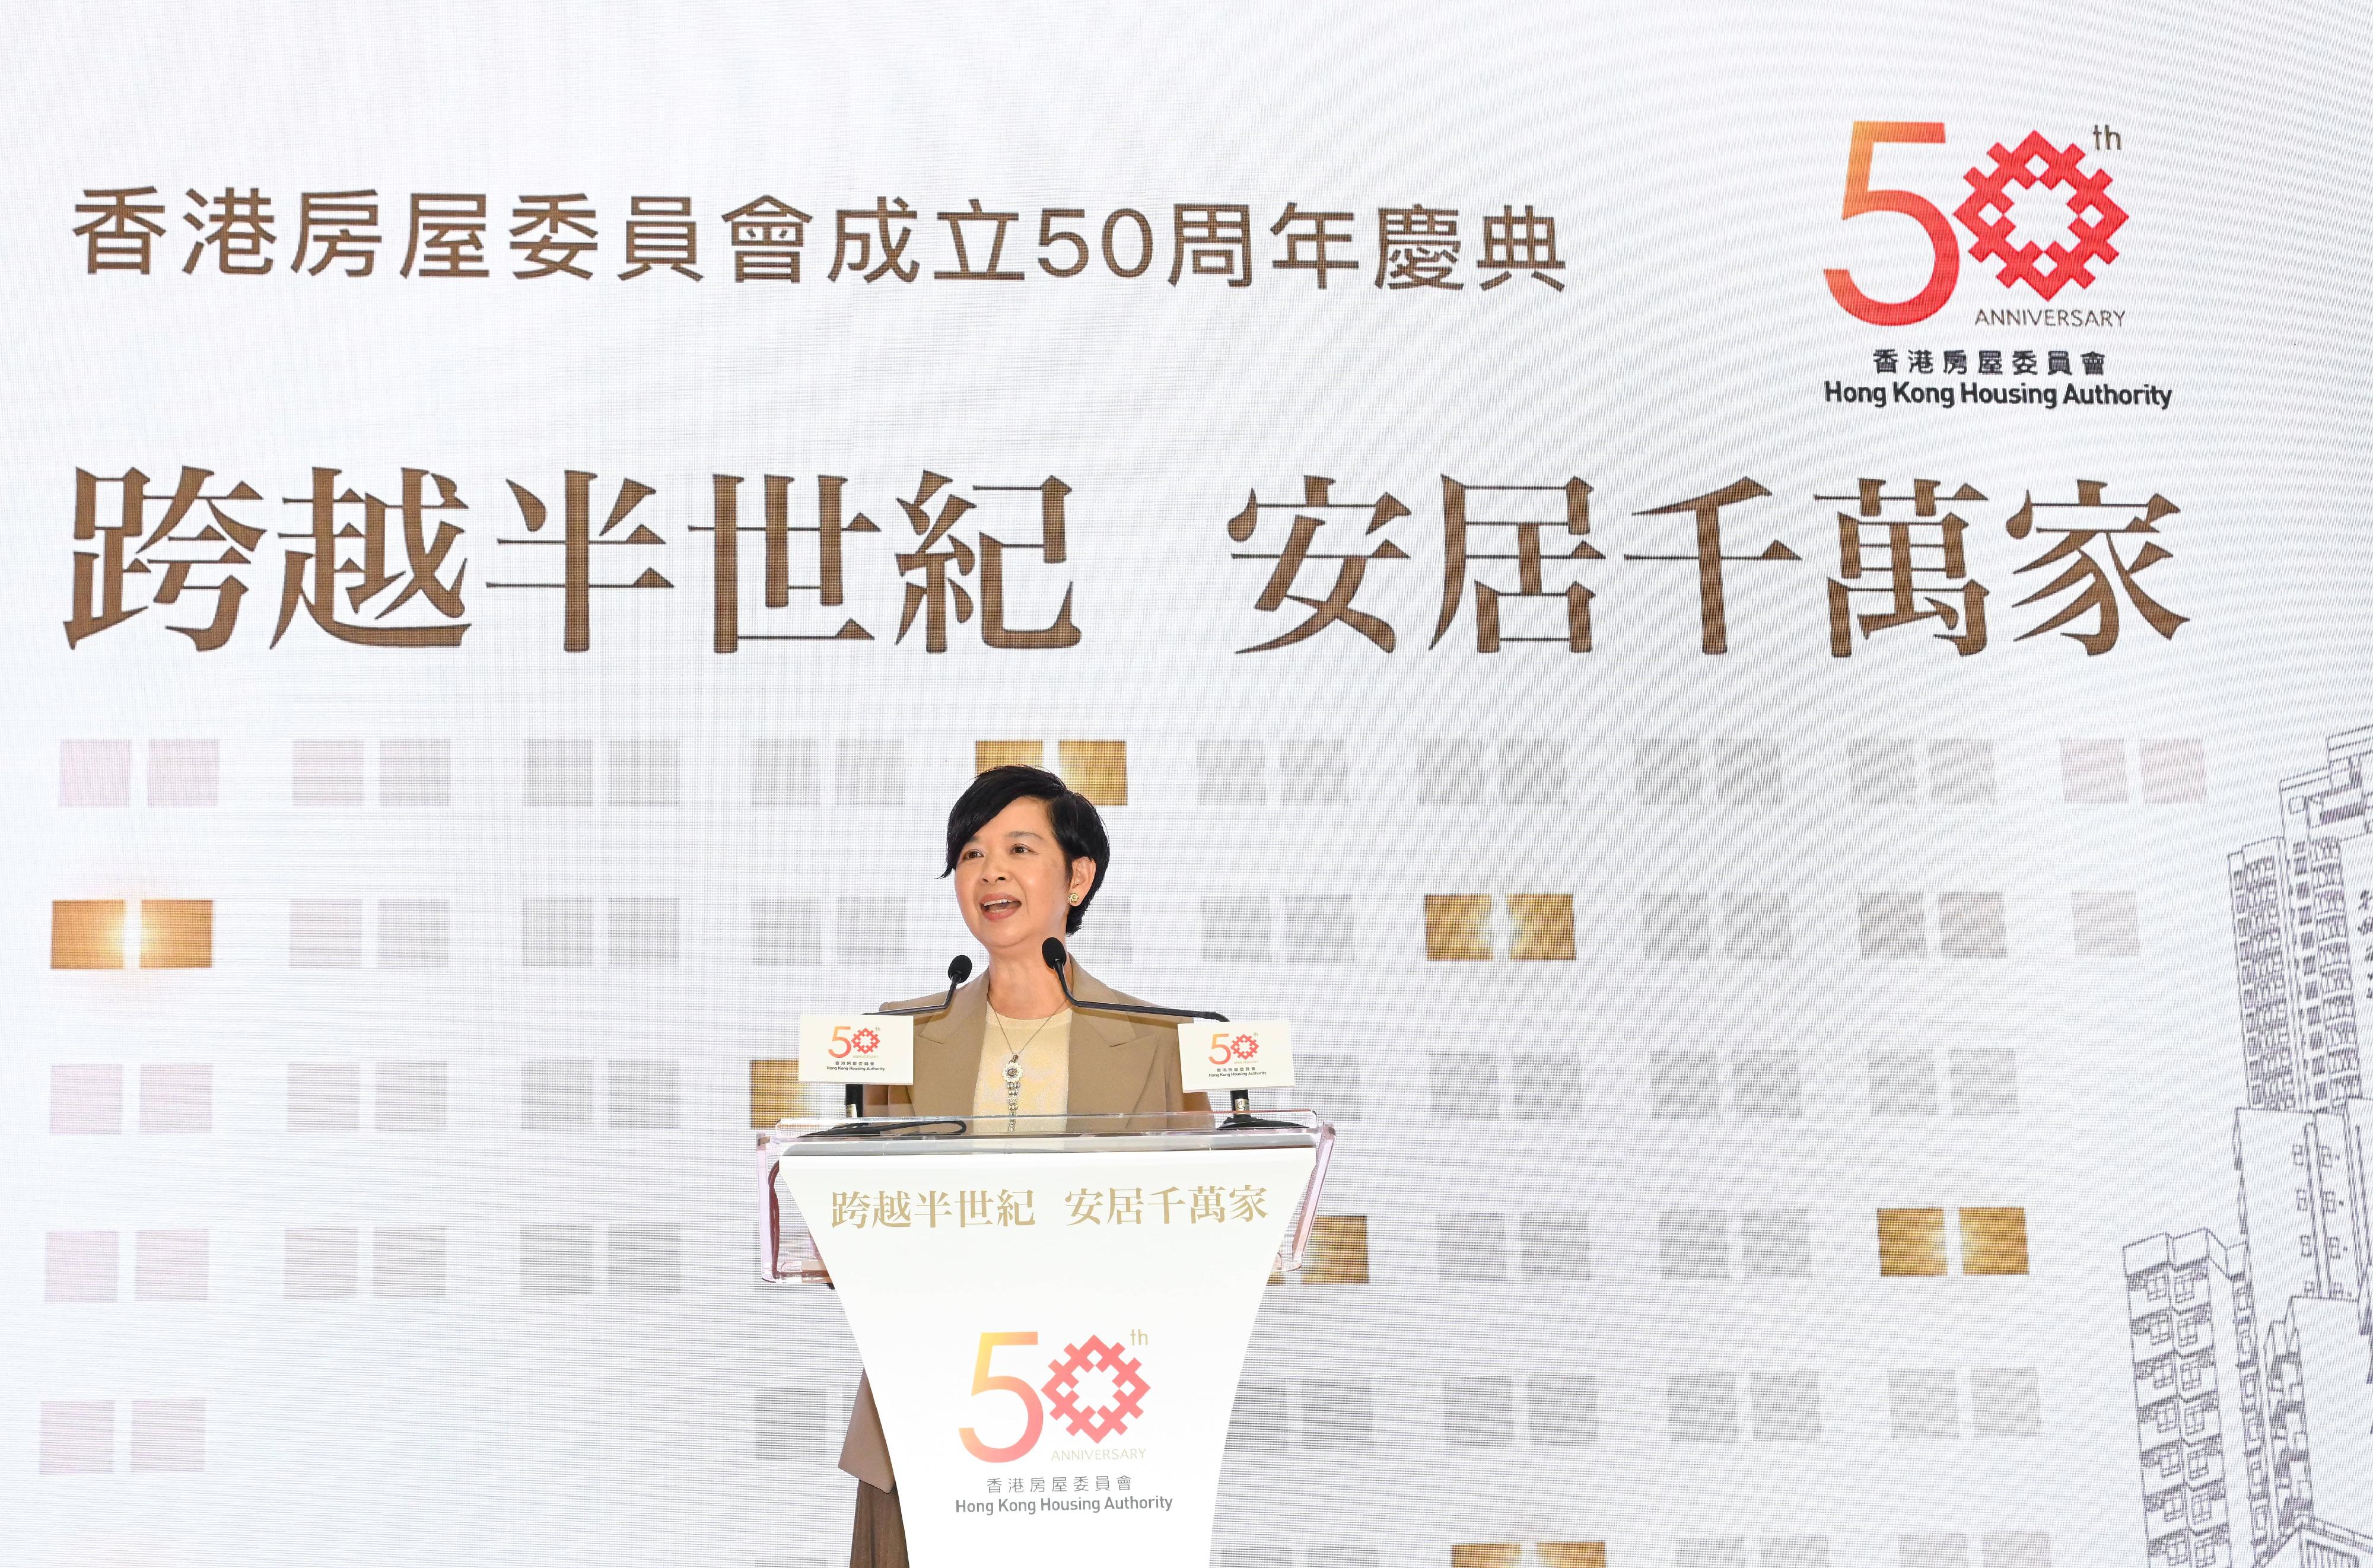 The Secretary for Housing and Chairman of the Hong Kong Housing Authority (HA), Ms Winnie Ho, attended the 50th anniversary celebration ceremony of the HA today (December 12) at the HA's Domain shopping mall. Photo shows Ms Ho speaking at the ceremony.